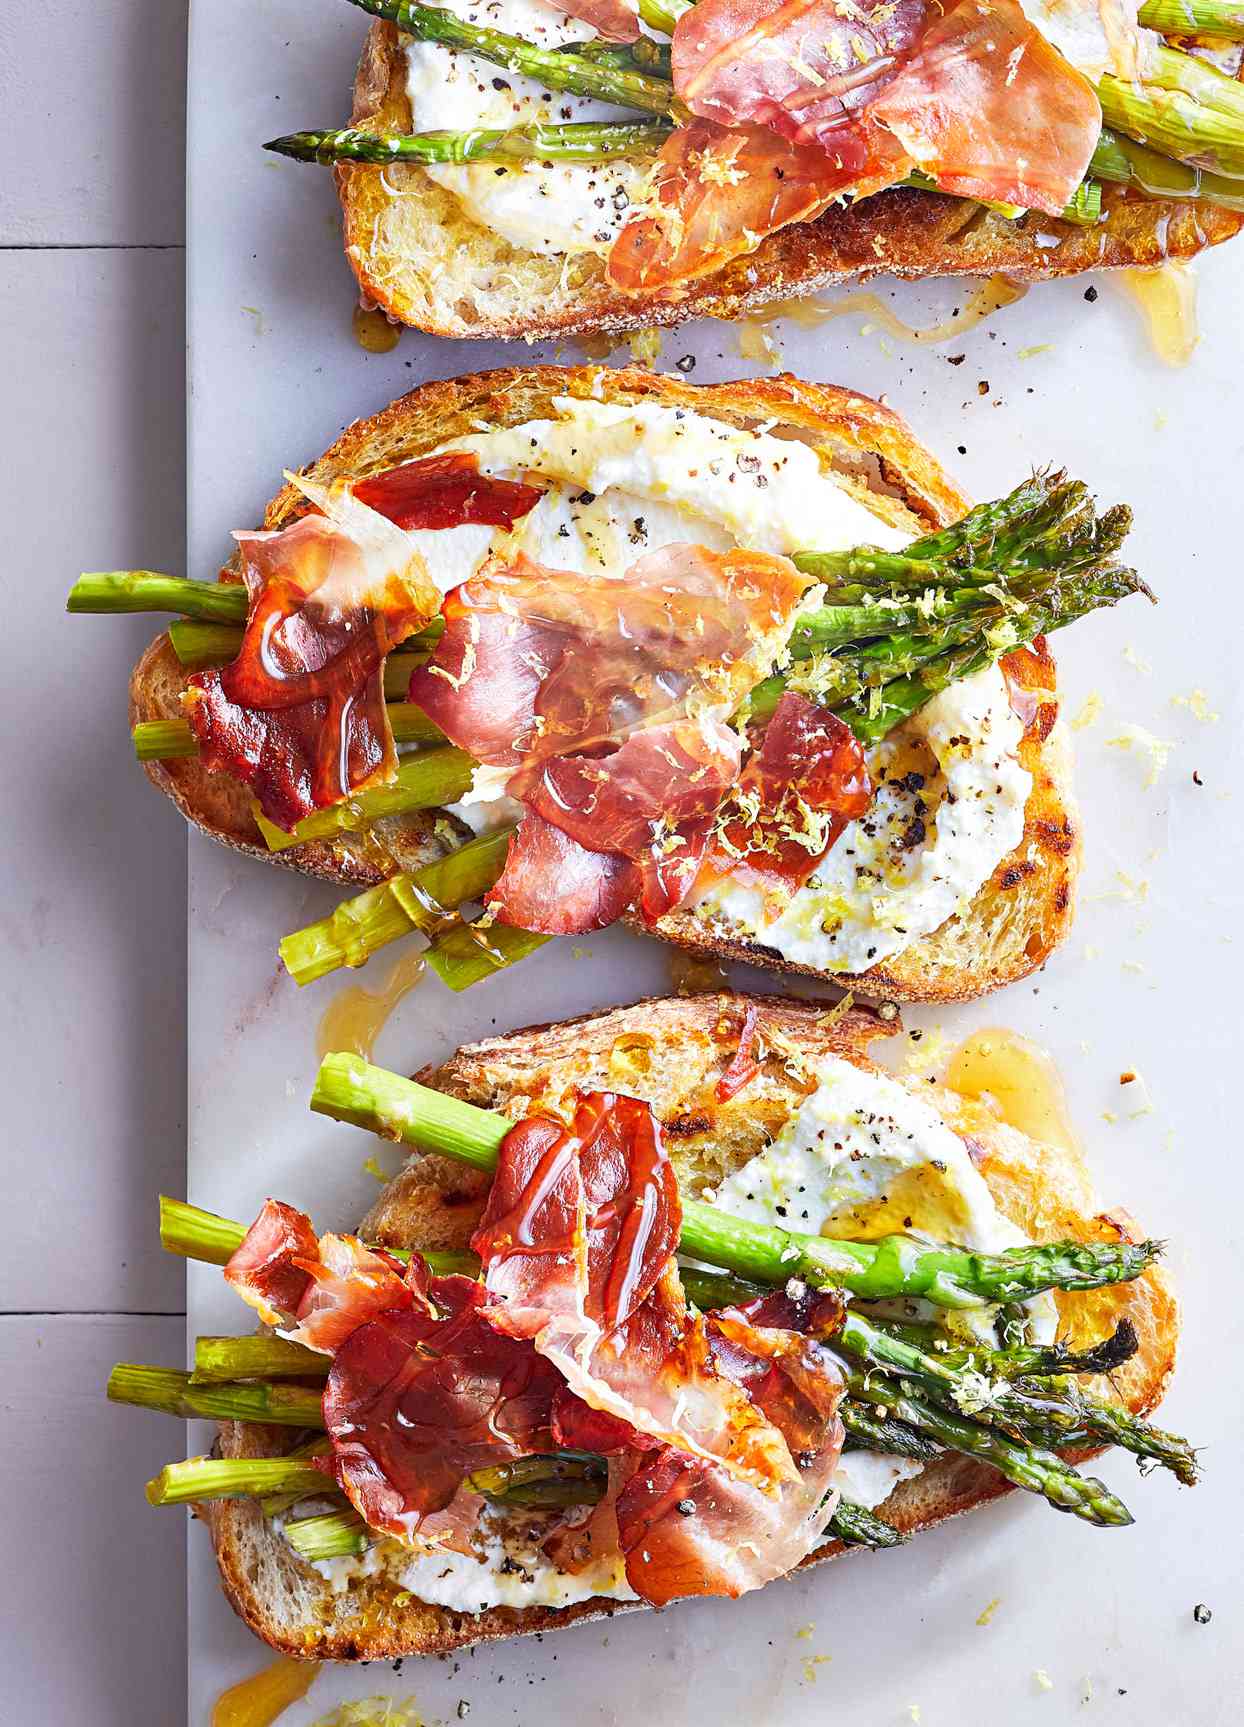 <p>When you're feeling lazy at suppertime, these simple toasts are ready in just 15 minutes.</p>
                          <p>Related: Asparagus Recipes to Brighten Your Meals</p>
                          